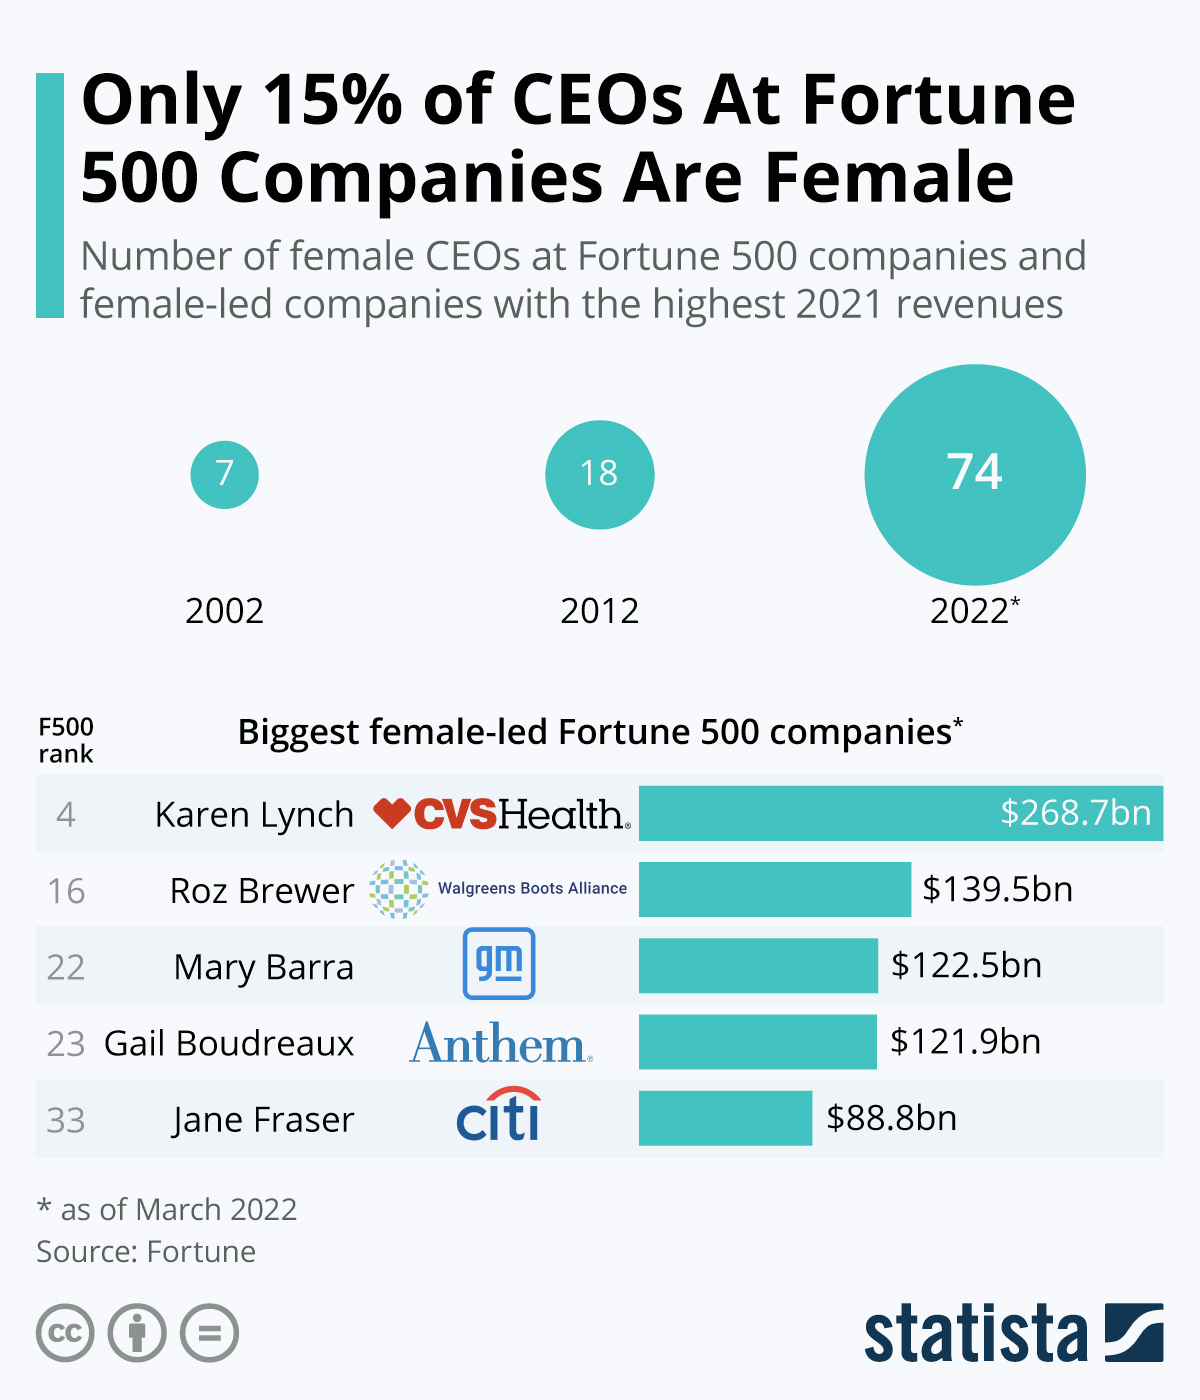 infographic showing how 15% of CEOs at Fortune 500 companies are female